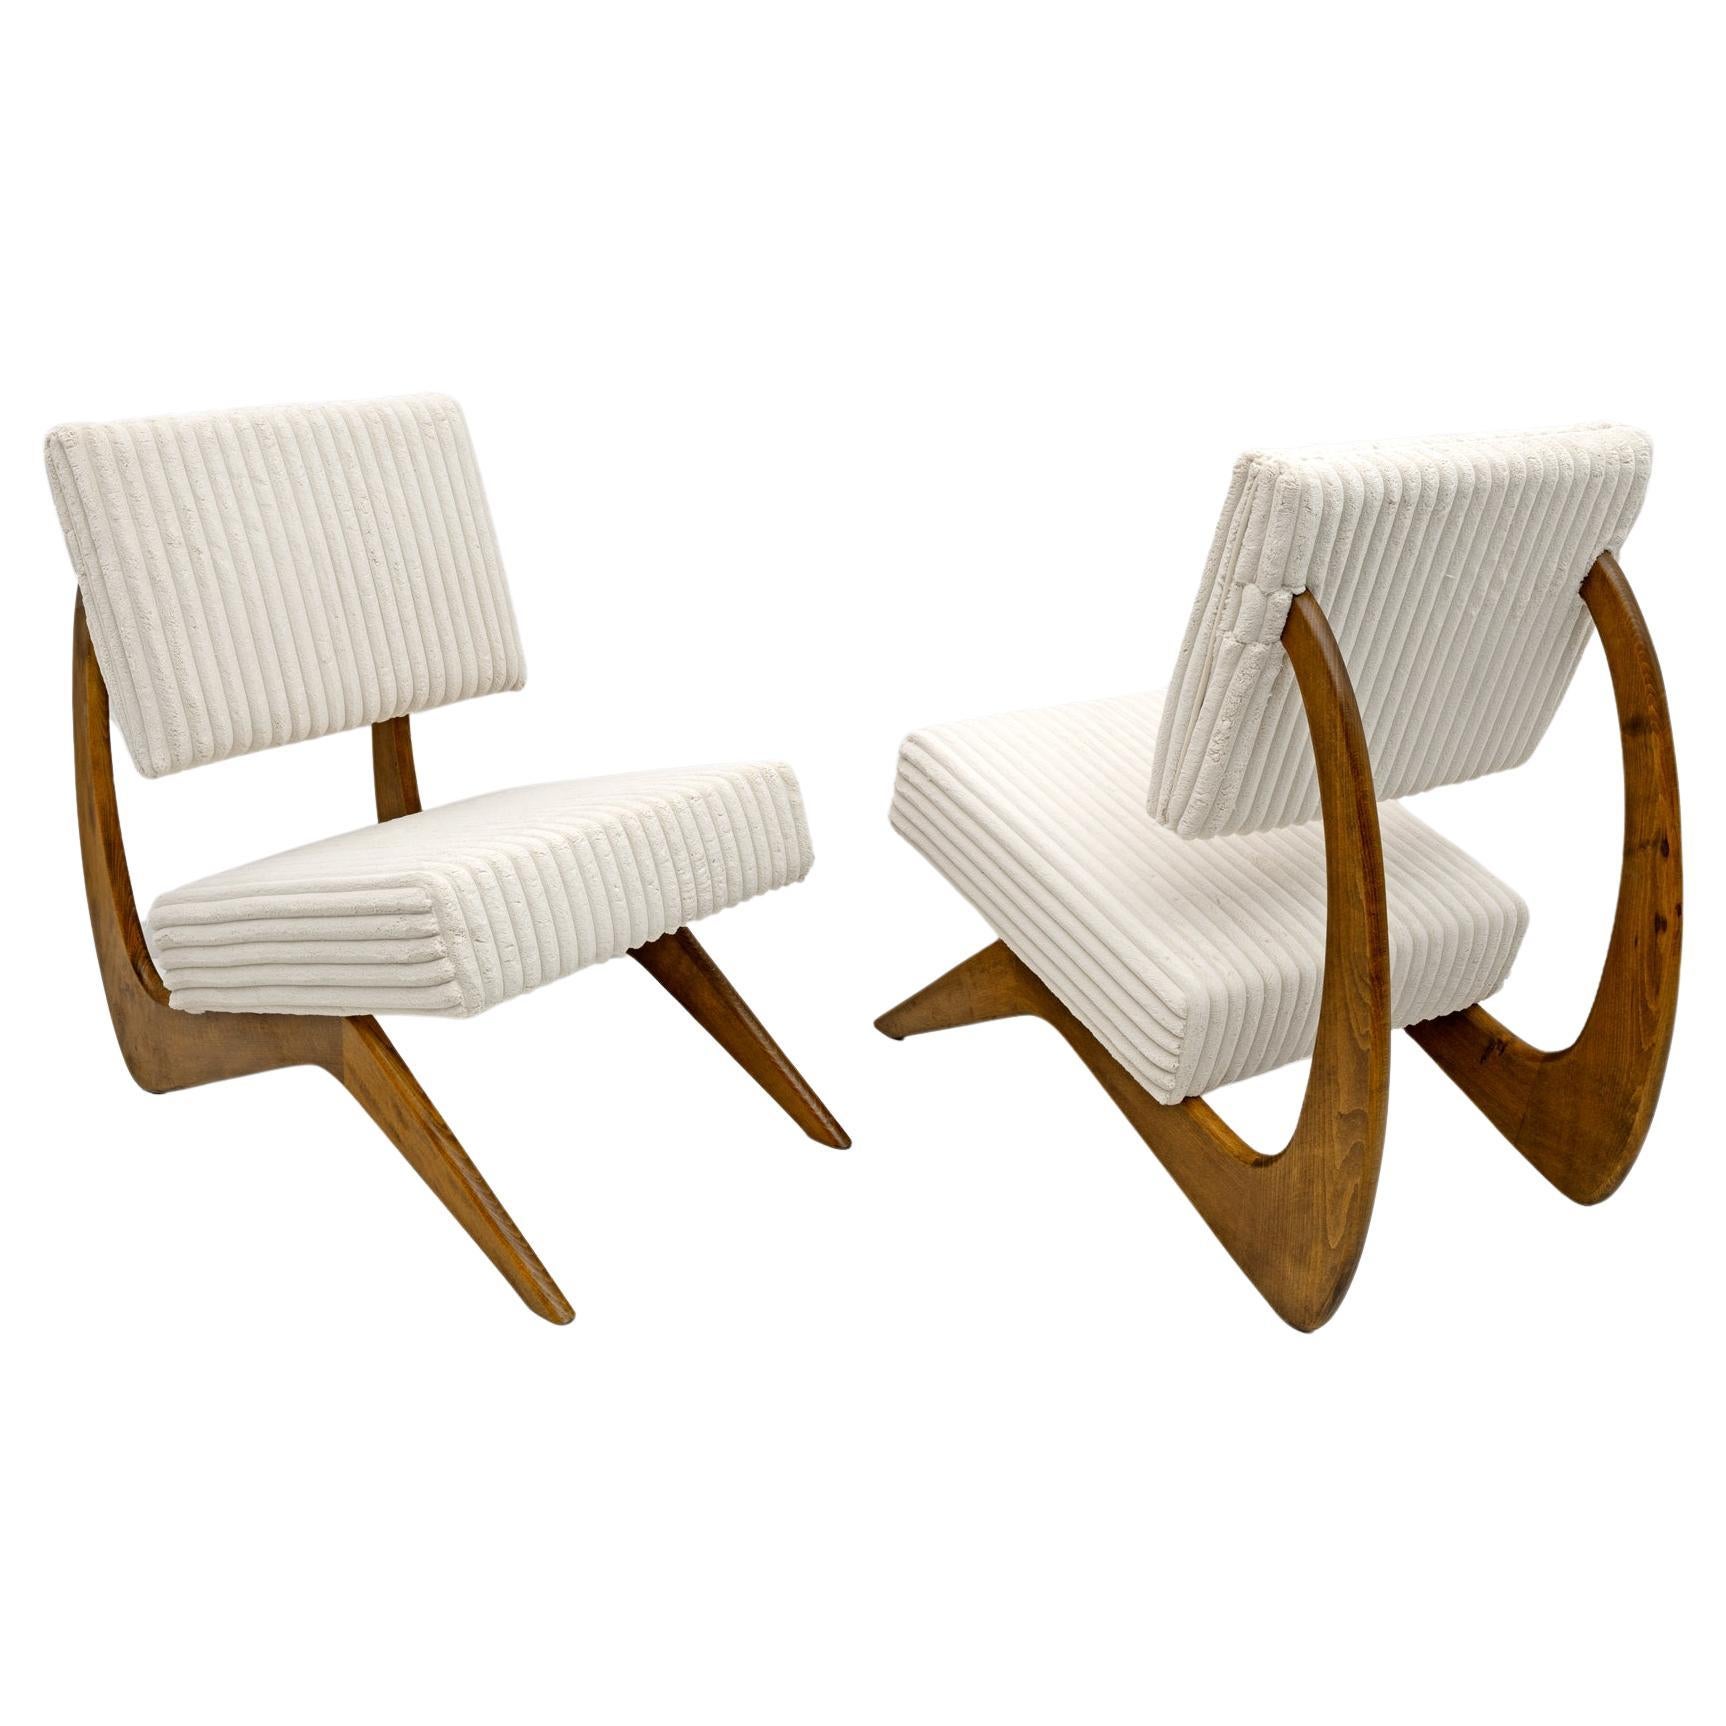 Pair of Adrian Pearsall Midcentury Walnut Lounge Chairs for Craft Associates